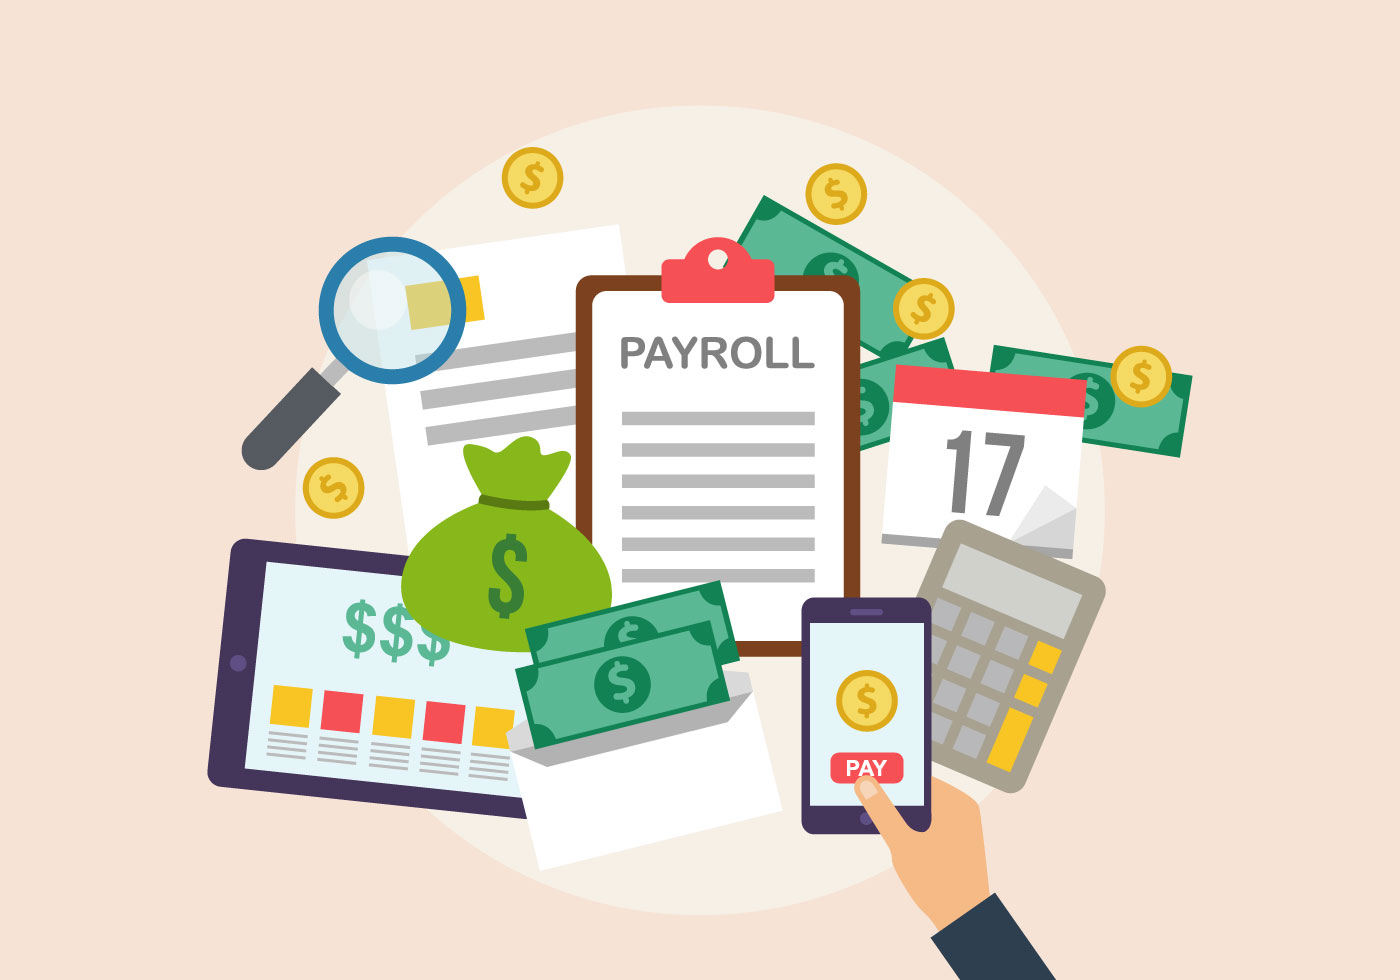 Download the Payroll Vector Illustration 163010